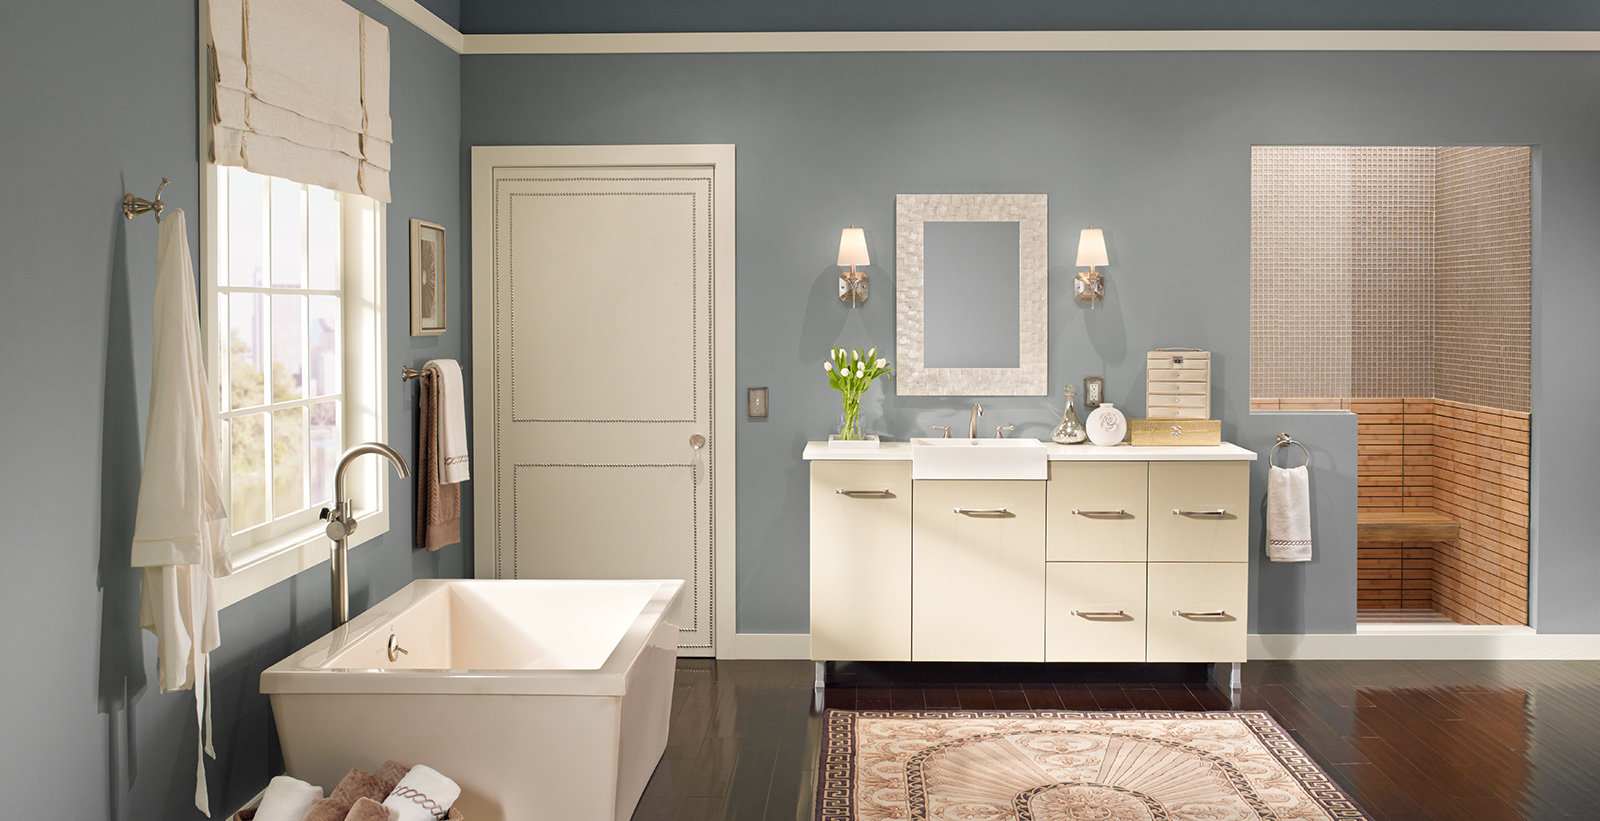 Relax styled bathroom with blue-gray walls and white trim.